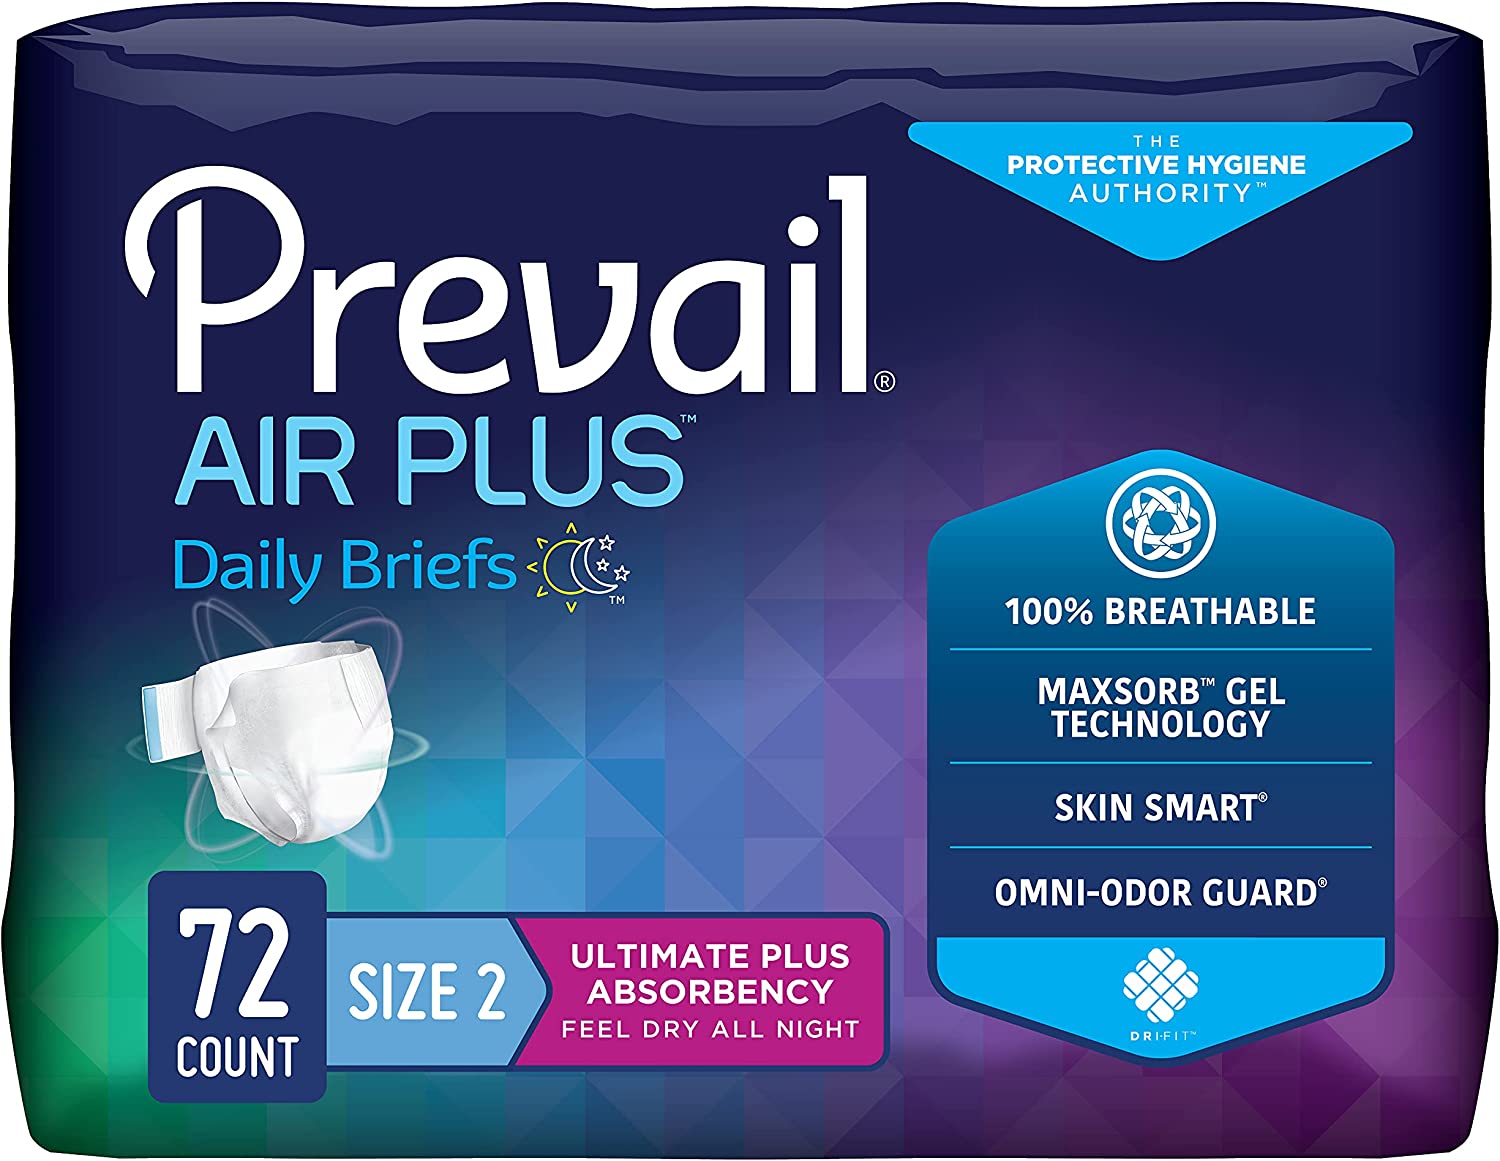  Prevail Proven - Incontinence Bladder Control Pads - Bladder  Leak Pads - Overnight Absorbency, 30 Count Bag : Health & Household